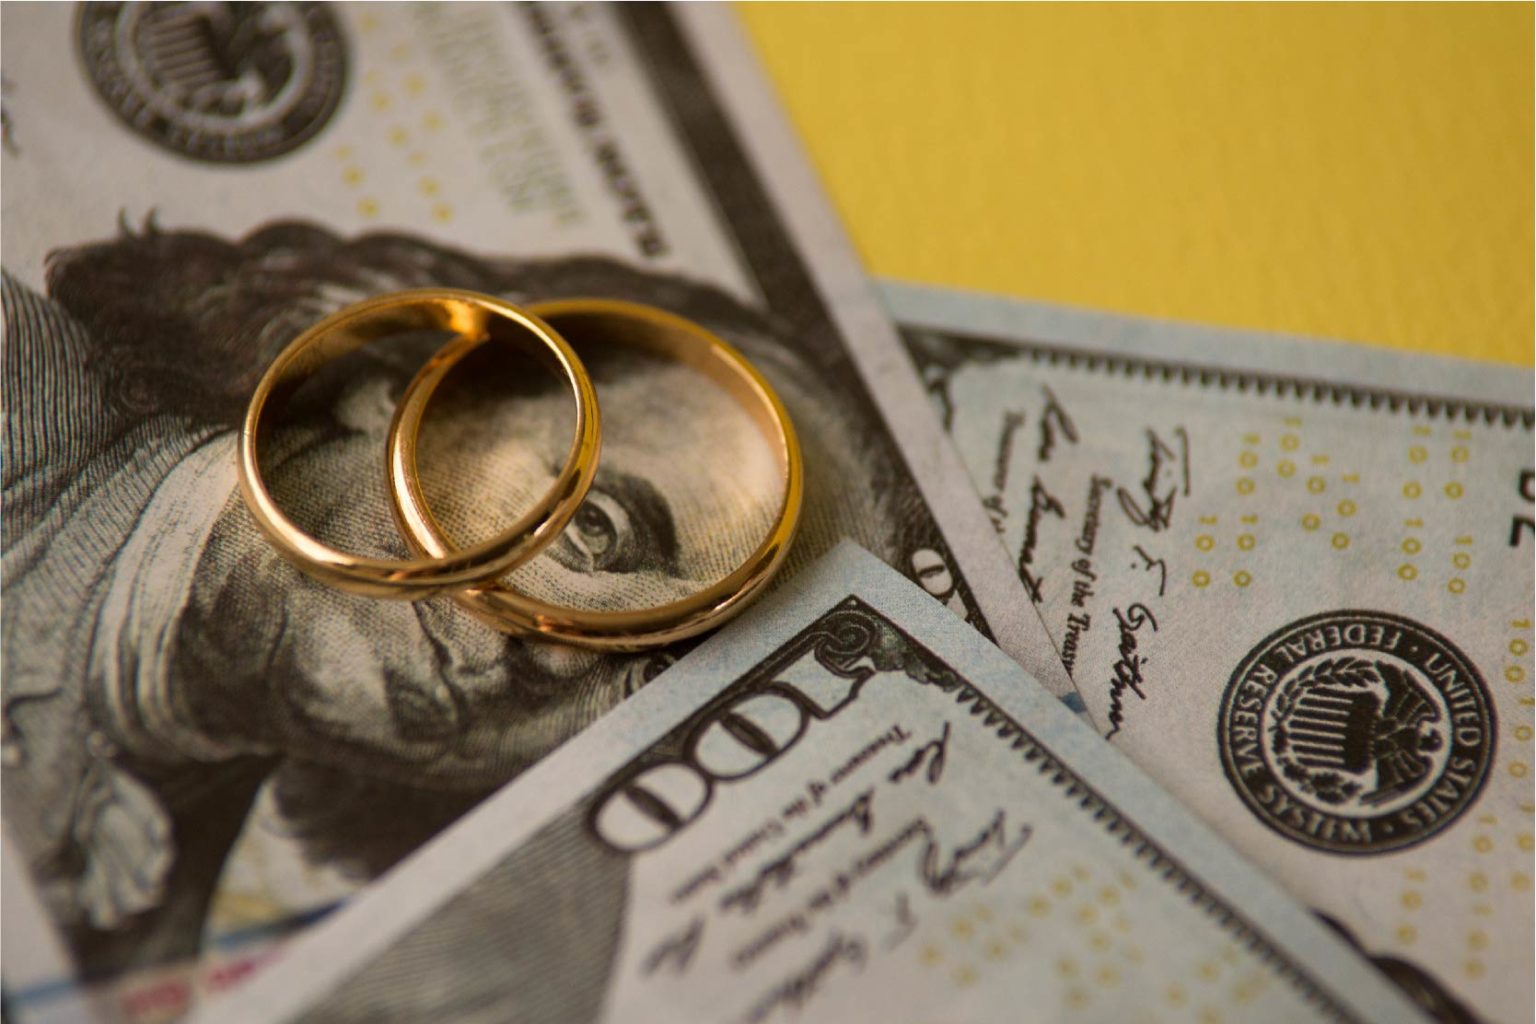 The Alimony Reform Statute and the Impact on Cohabitation Claims